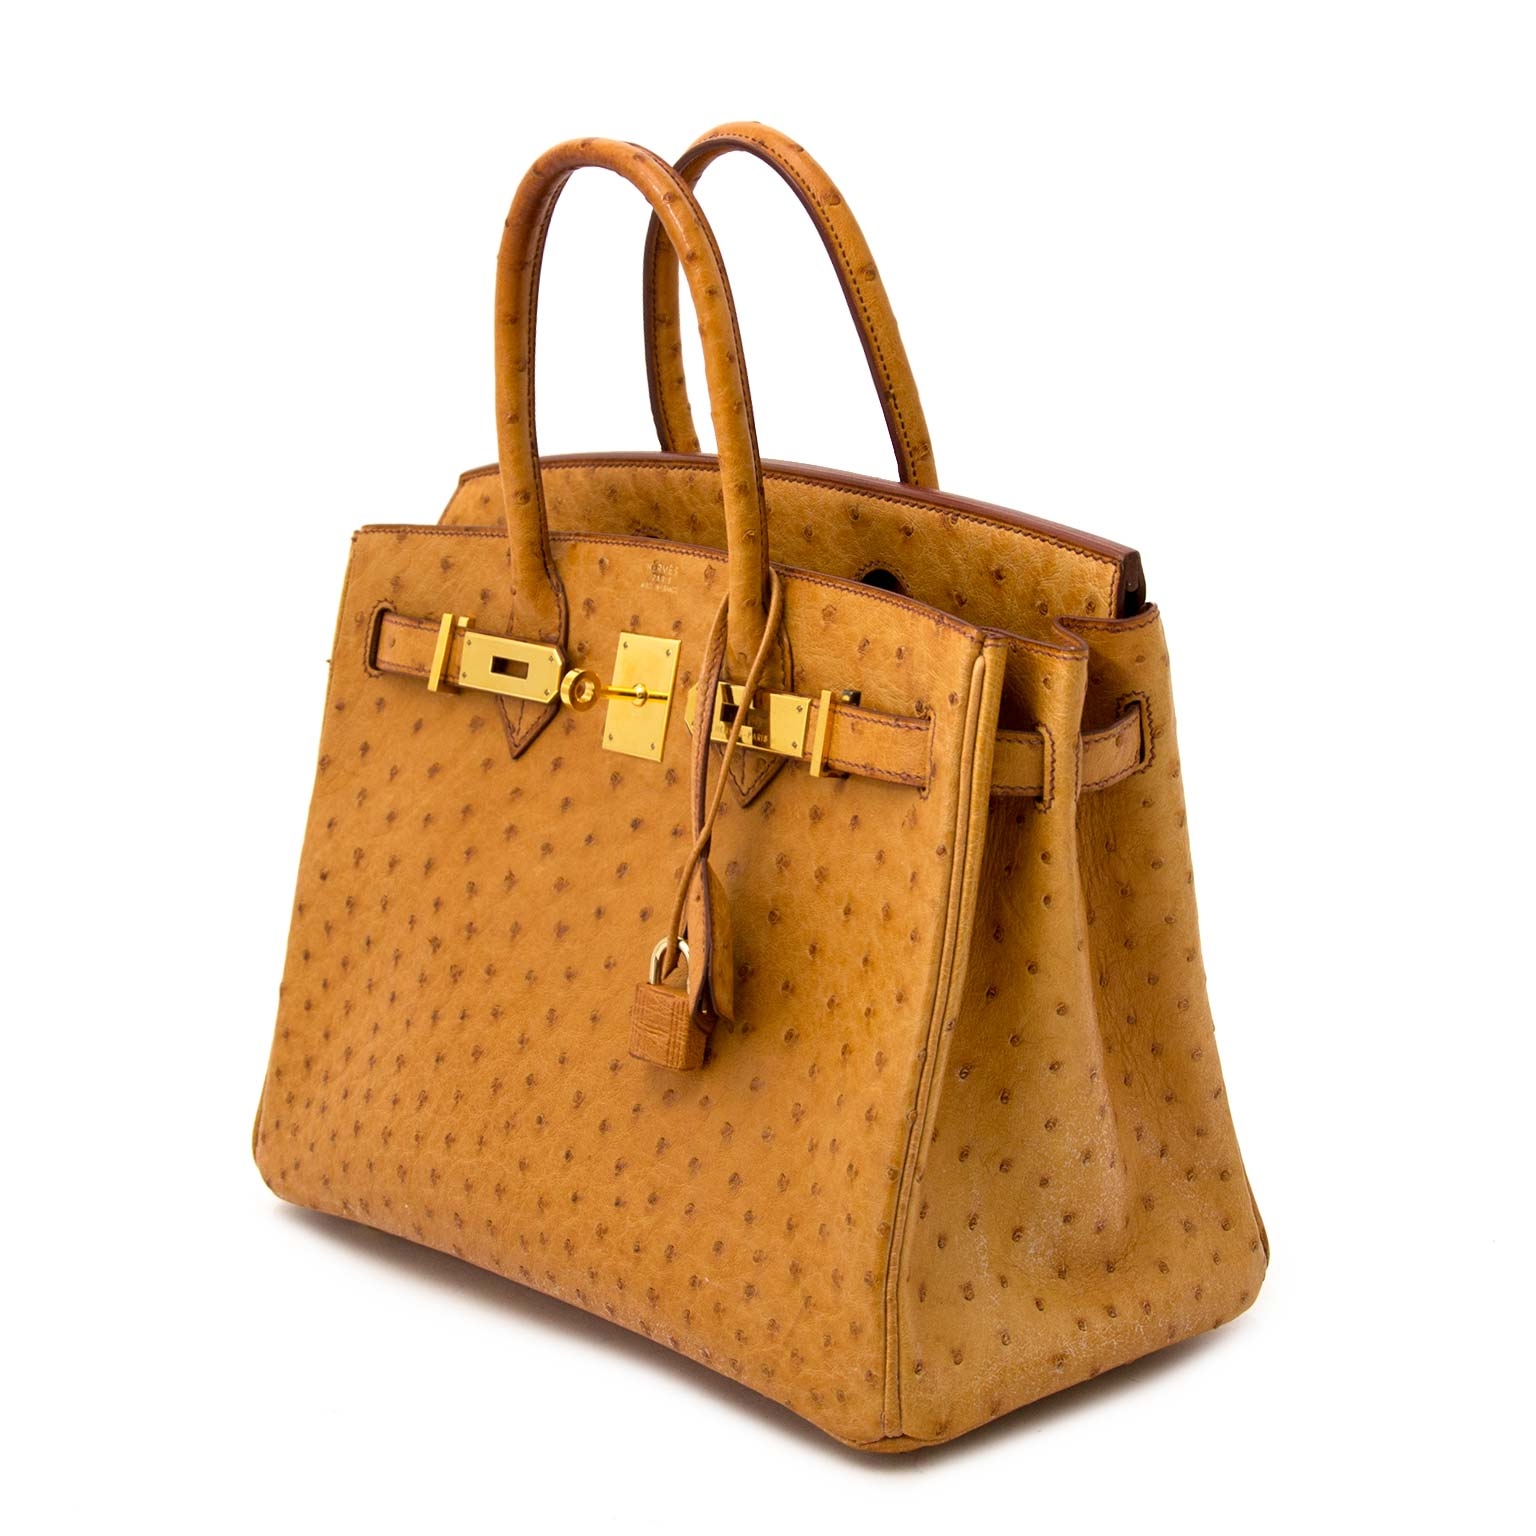 Hermès Cognac Ostrich Birkin 30 Gold Hardware, 2020 Available For Immediate  Sale At Sotheby's